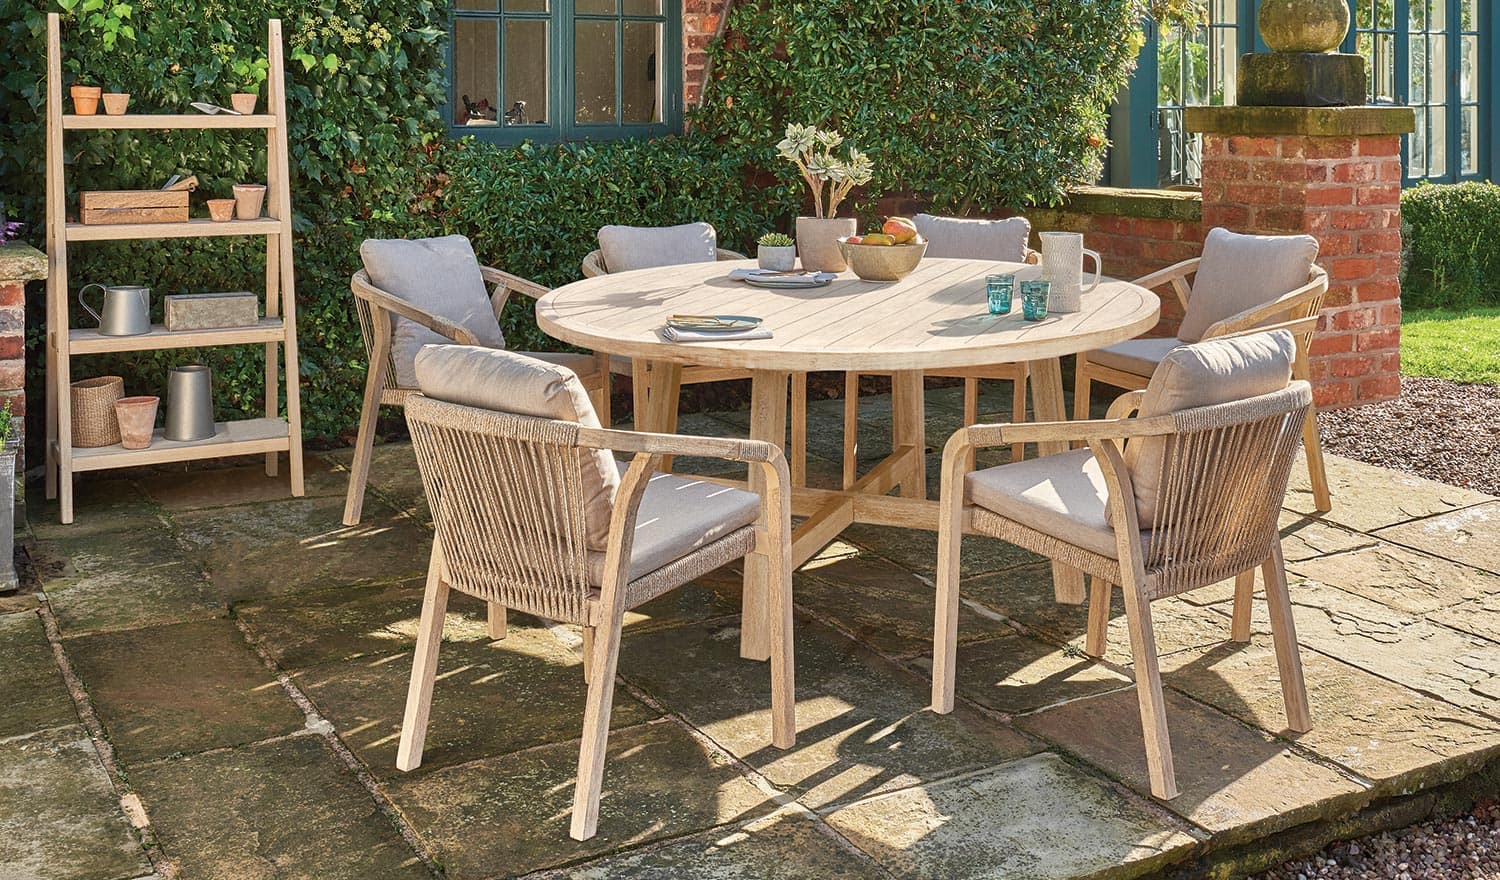 Cora 150cm Round Dining Table 6 Seater, Round Dining Table And 6 Chairs Uk